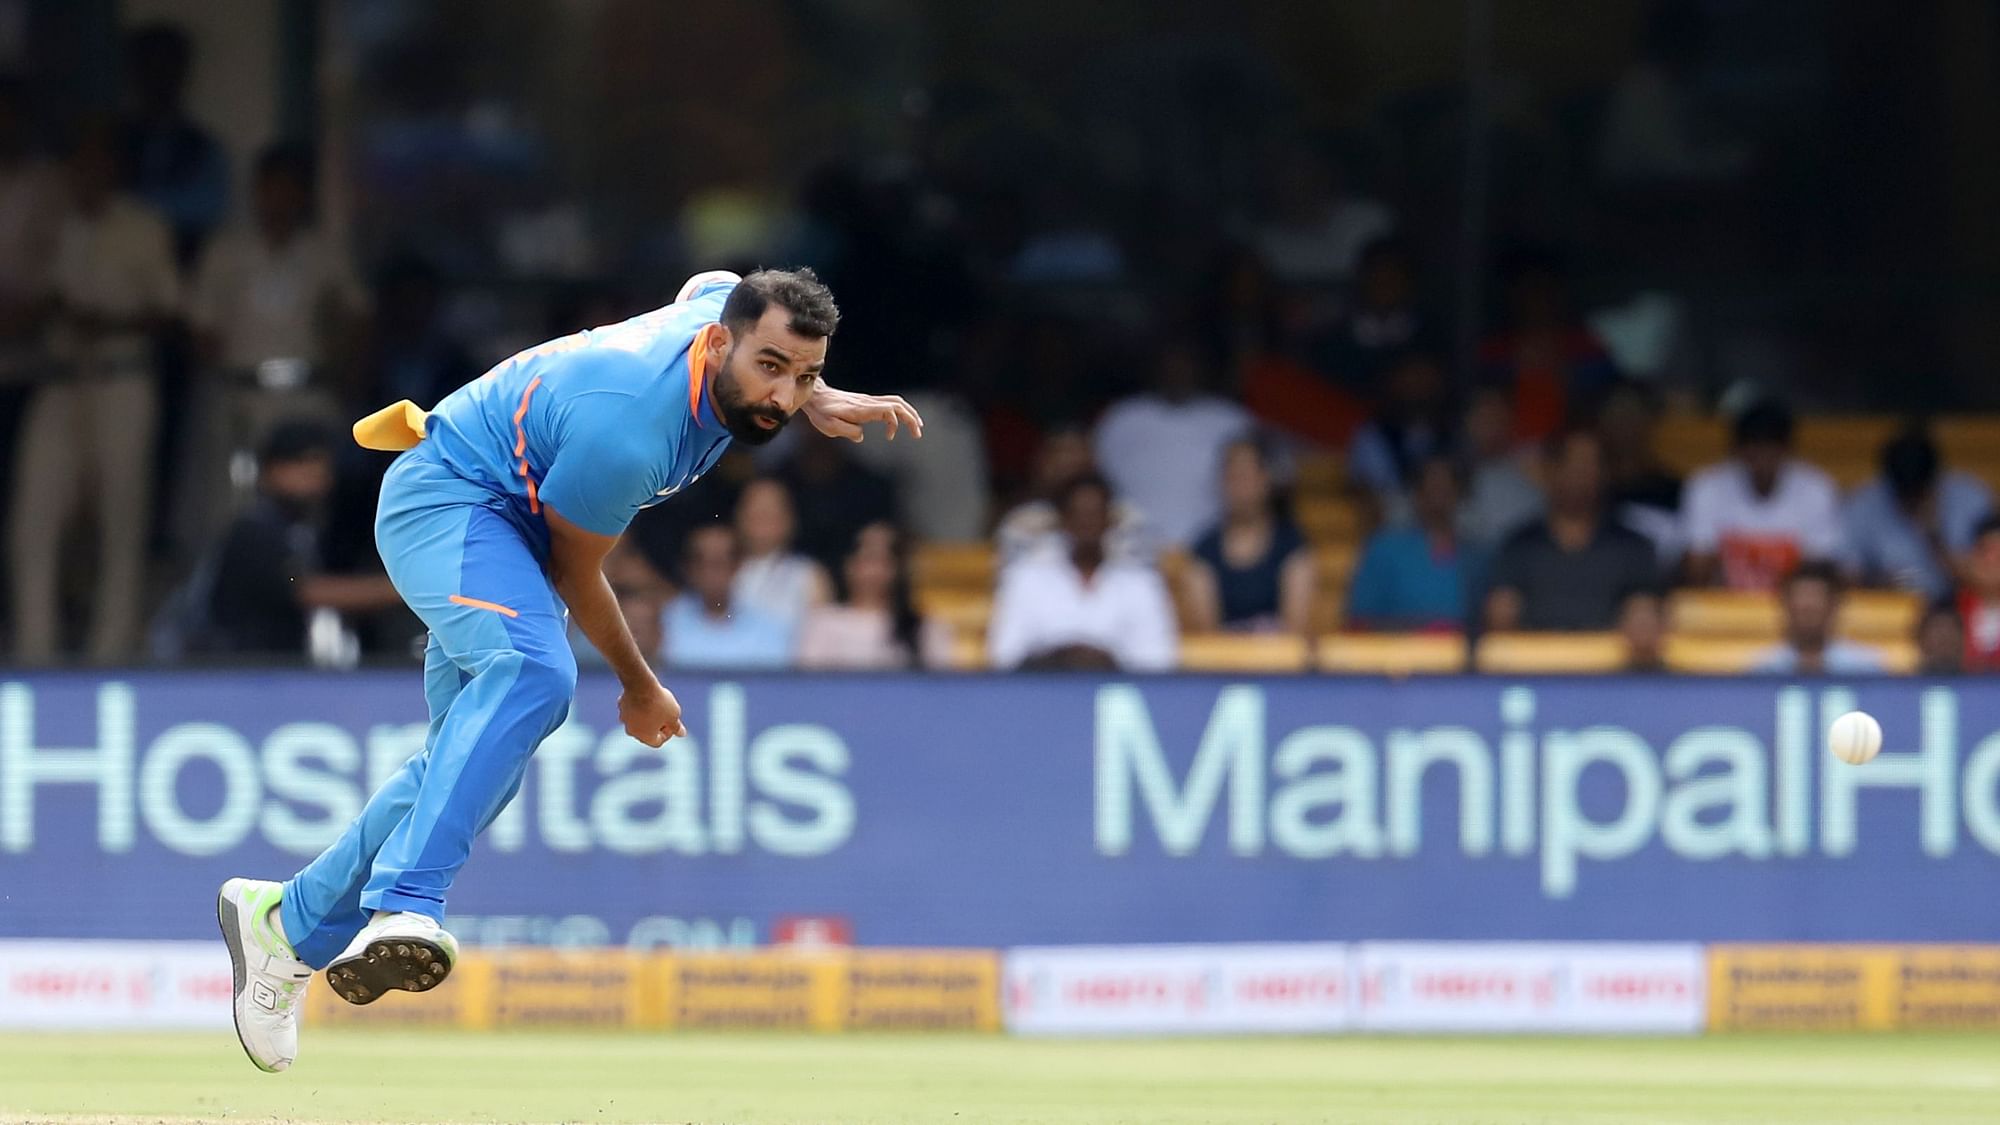 A serious knee injury had left Mohammed Shami virtually immobile prior to India’s 2015 World Cup semi-final against Australia.